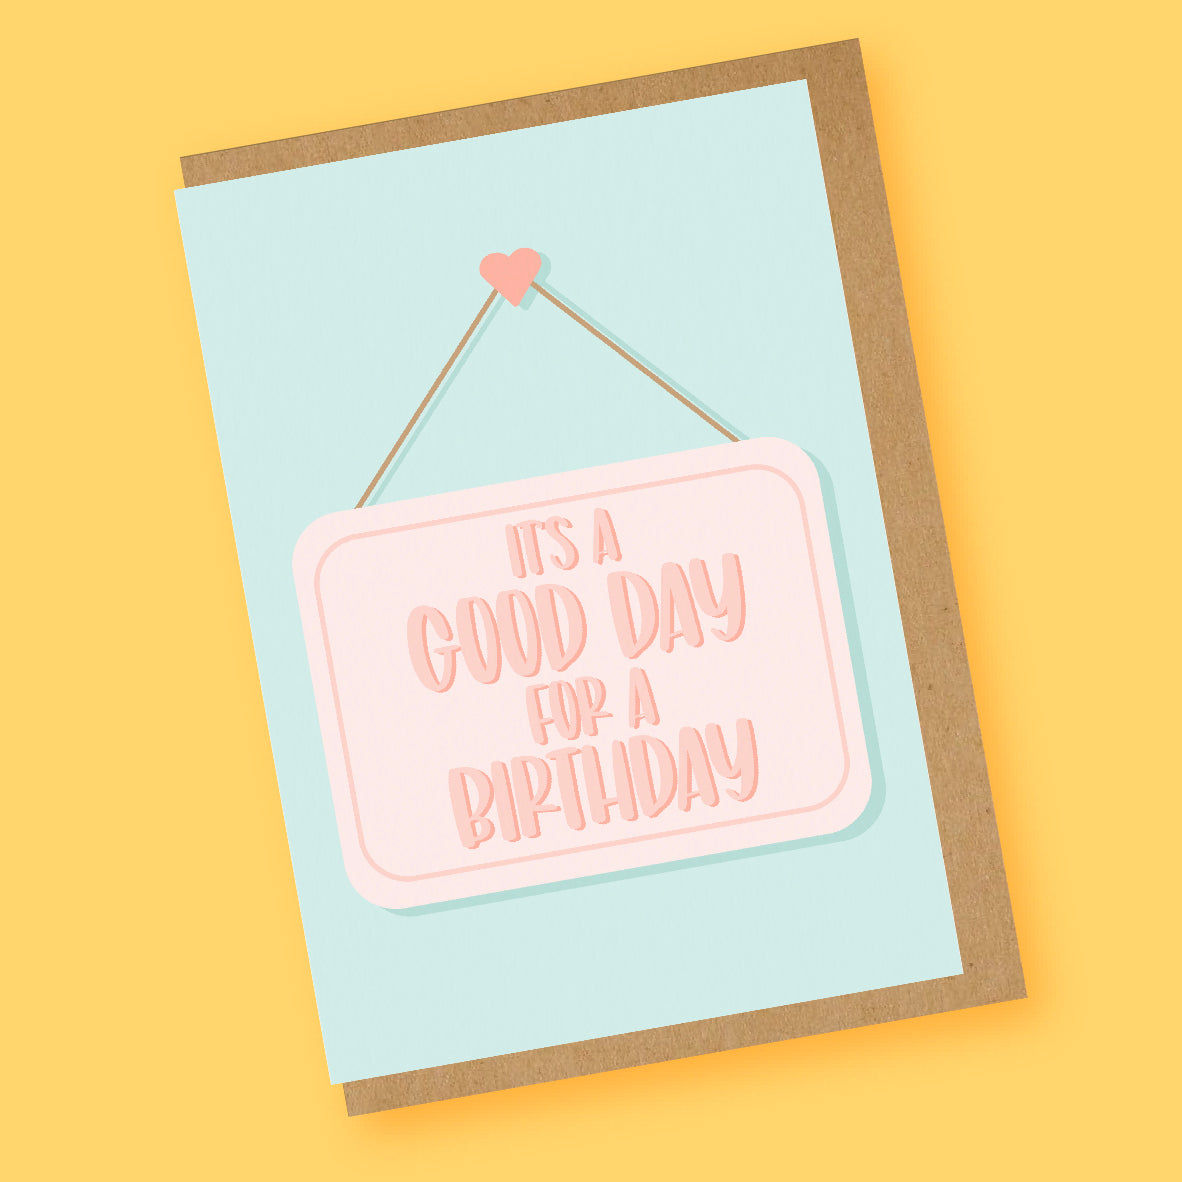 Good Day for a Birthday Card